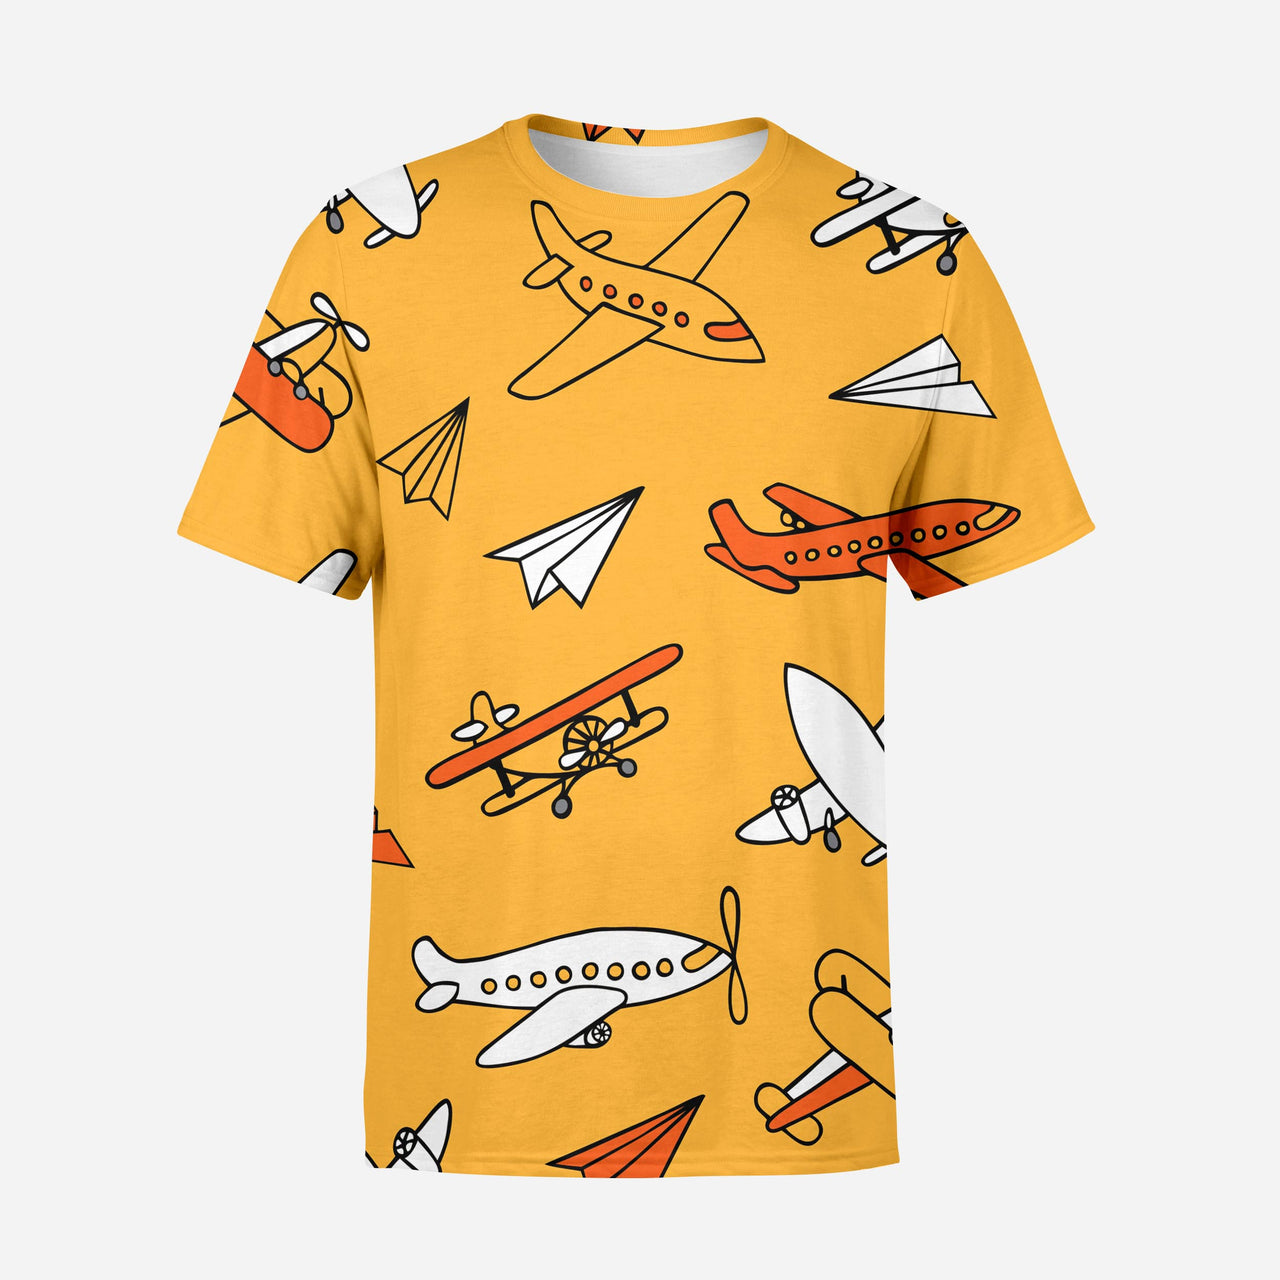 Super Drawings of Airplanes Designed 3D T-Shirts